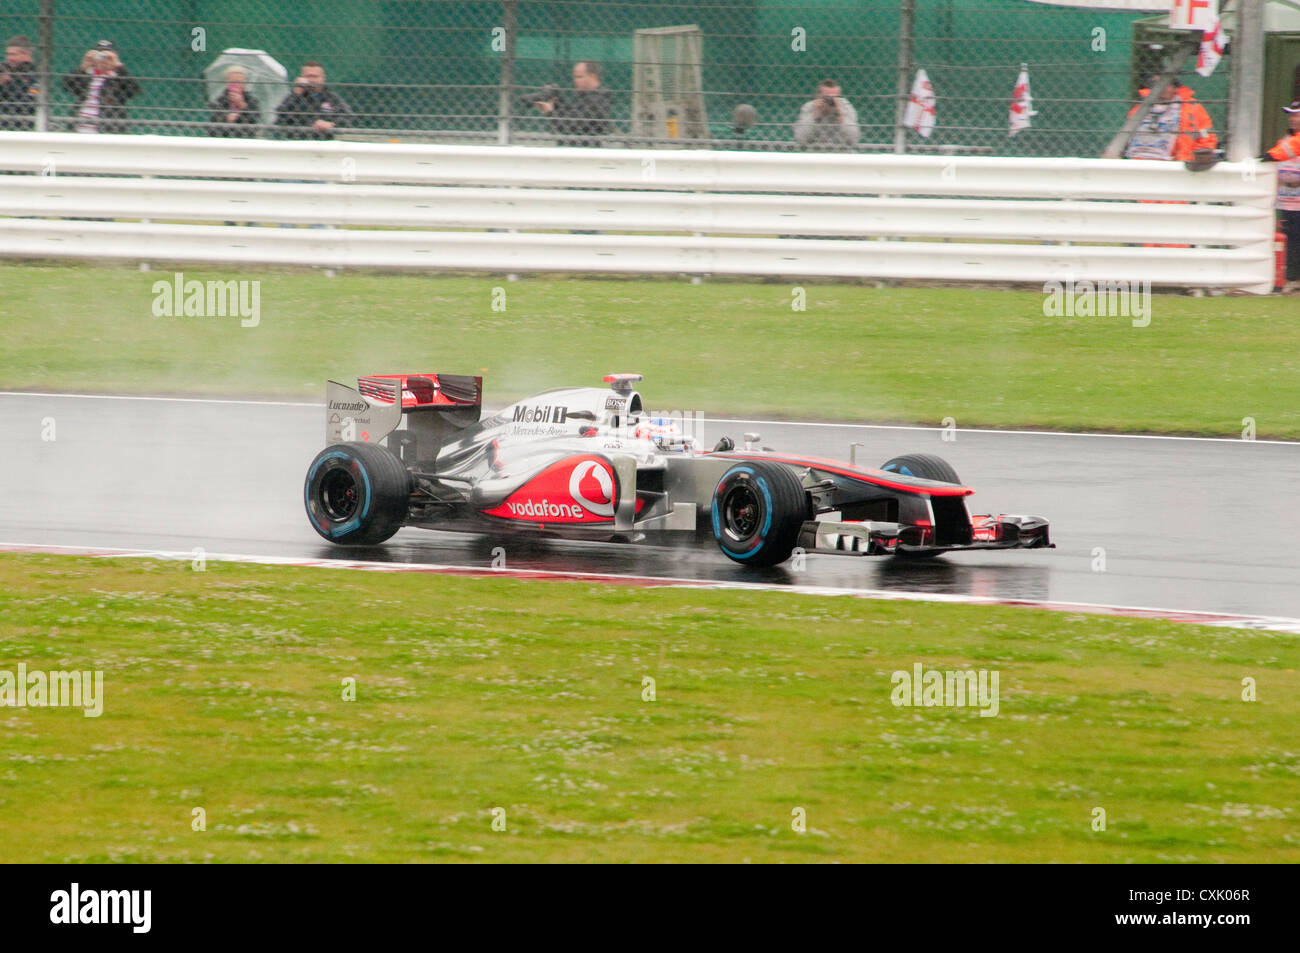 Jenson Button in his Lotus F1 Car in the Wet Stock Photo